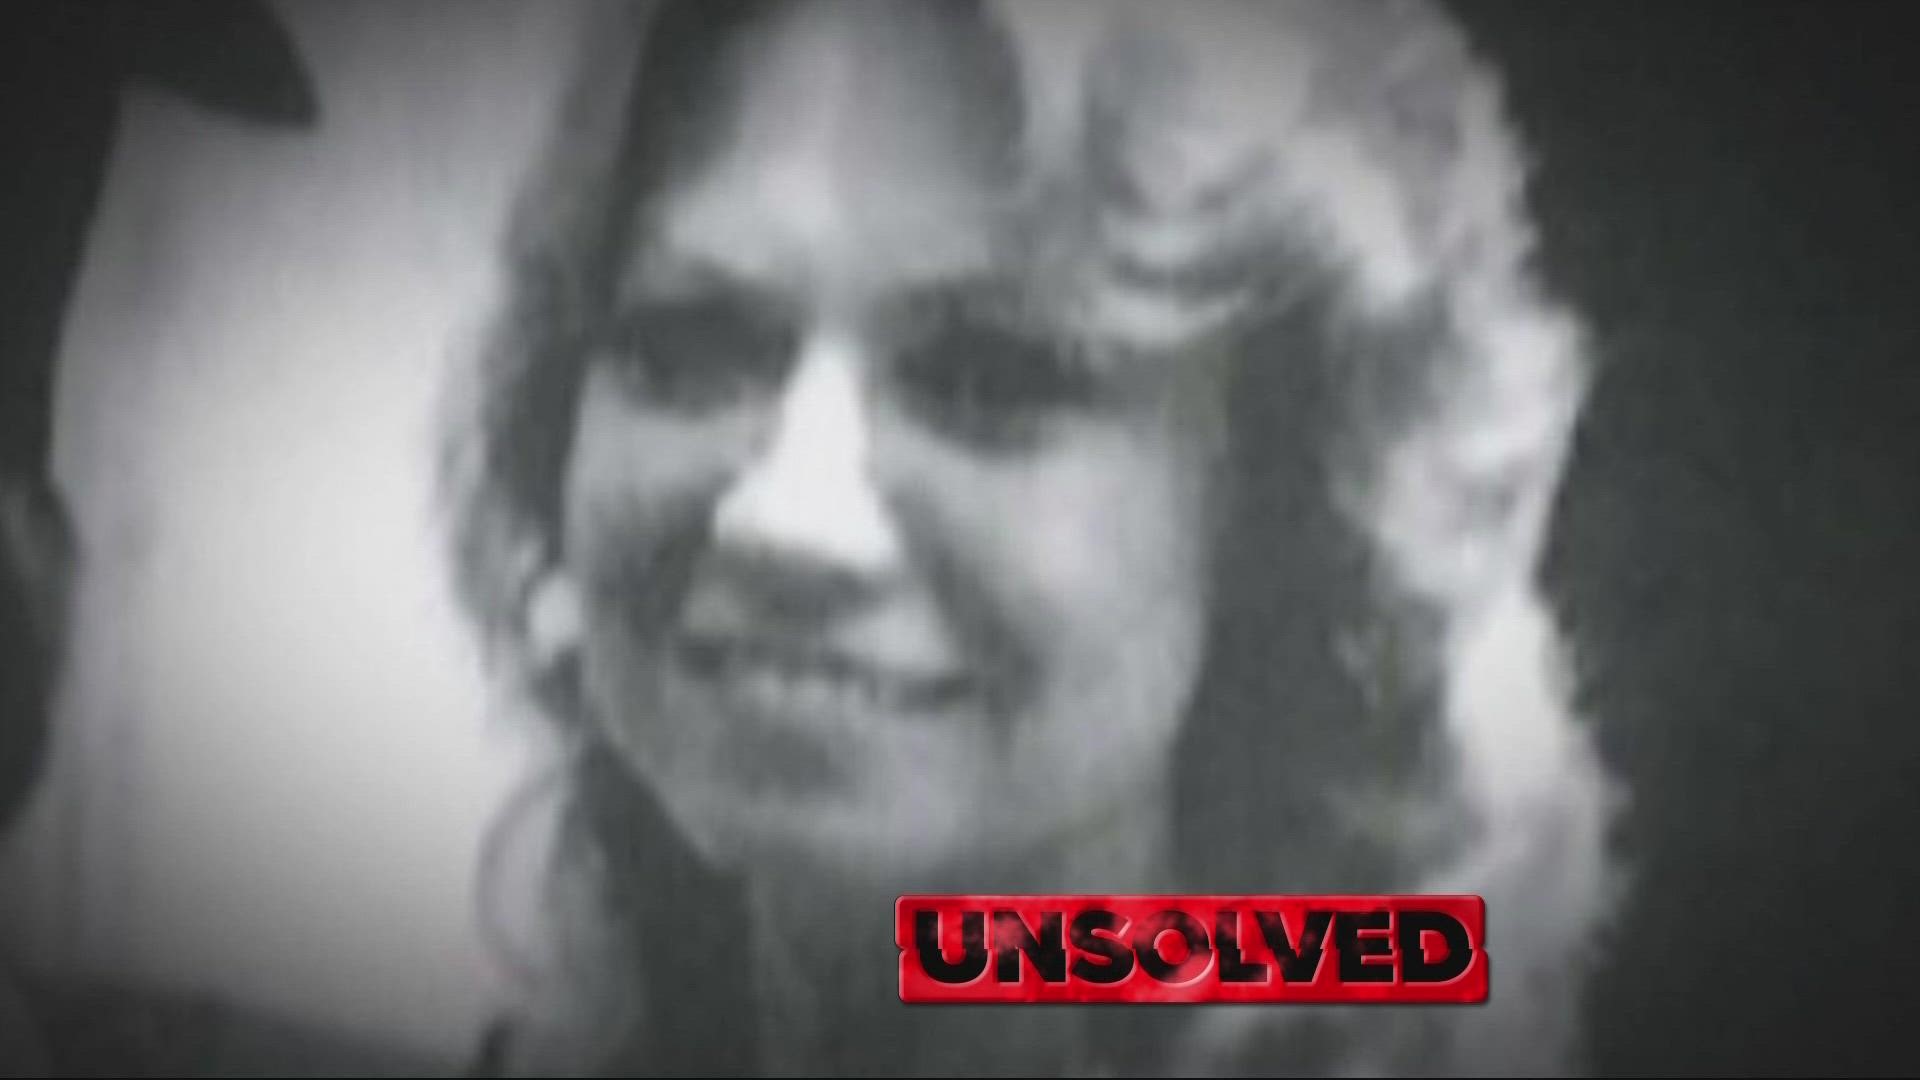 For decades, Nassau County detectives had no idea who the woman was. Found on the side of I-10 in 1987, one of her children offered up DNA. Her identity was learned.